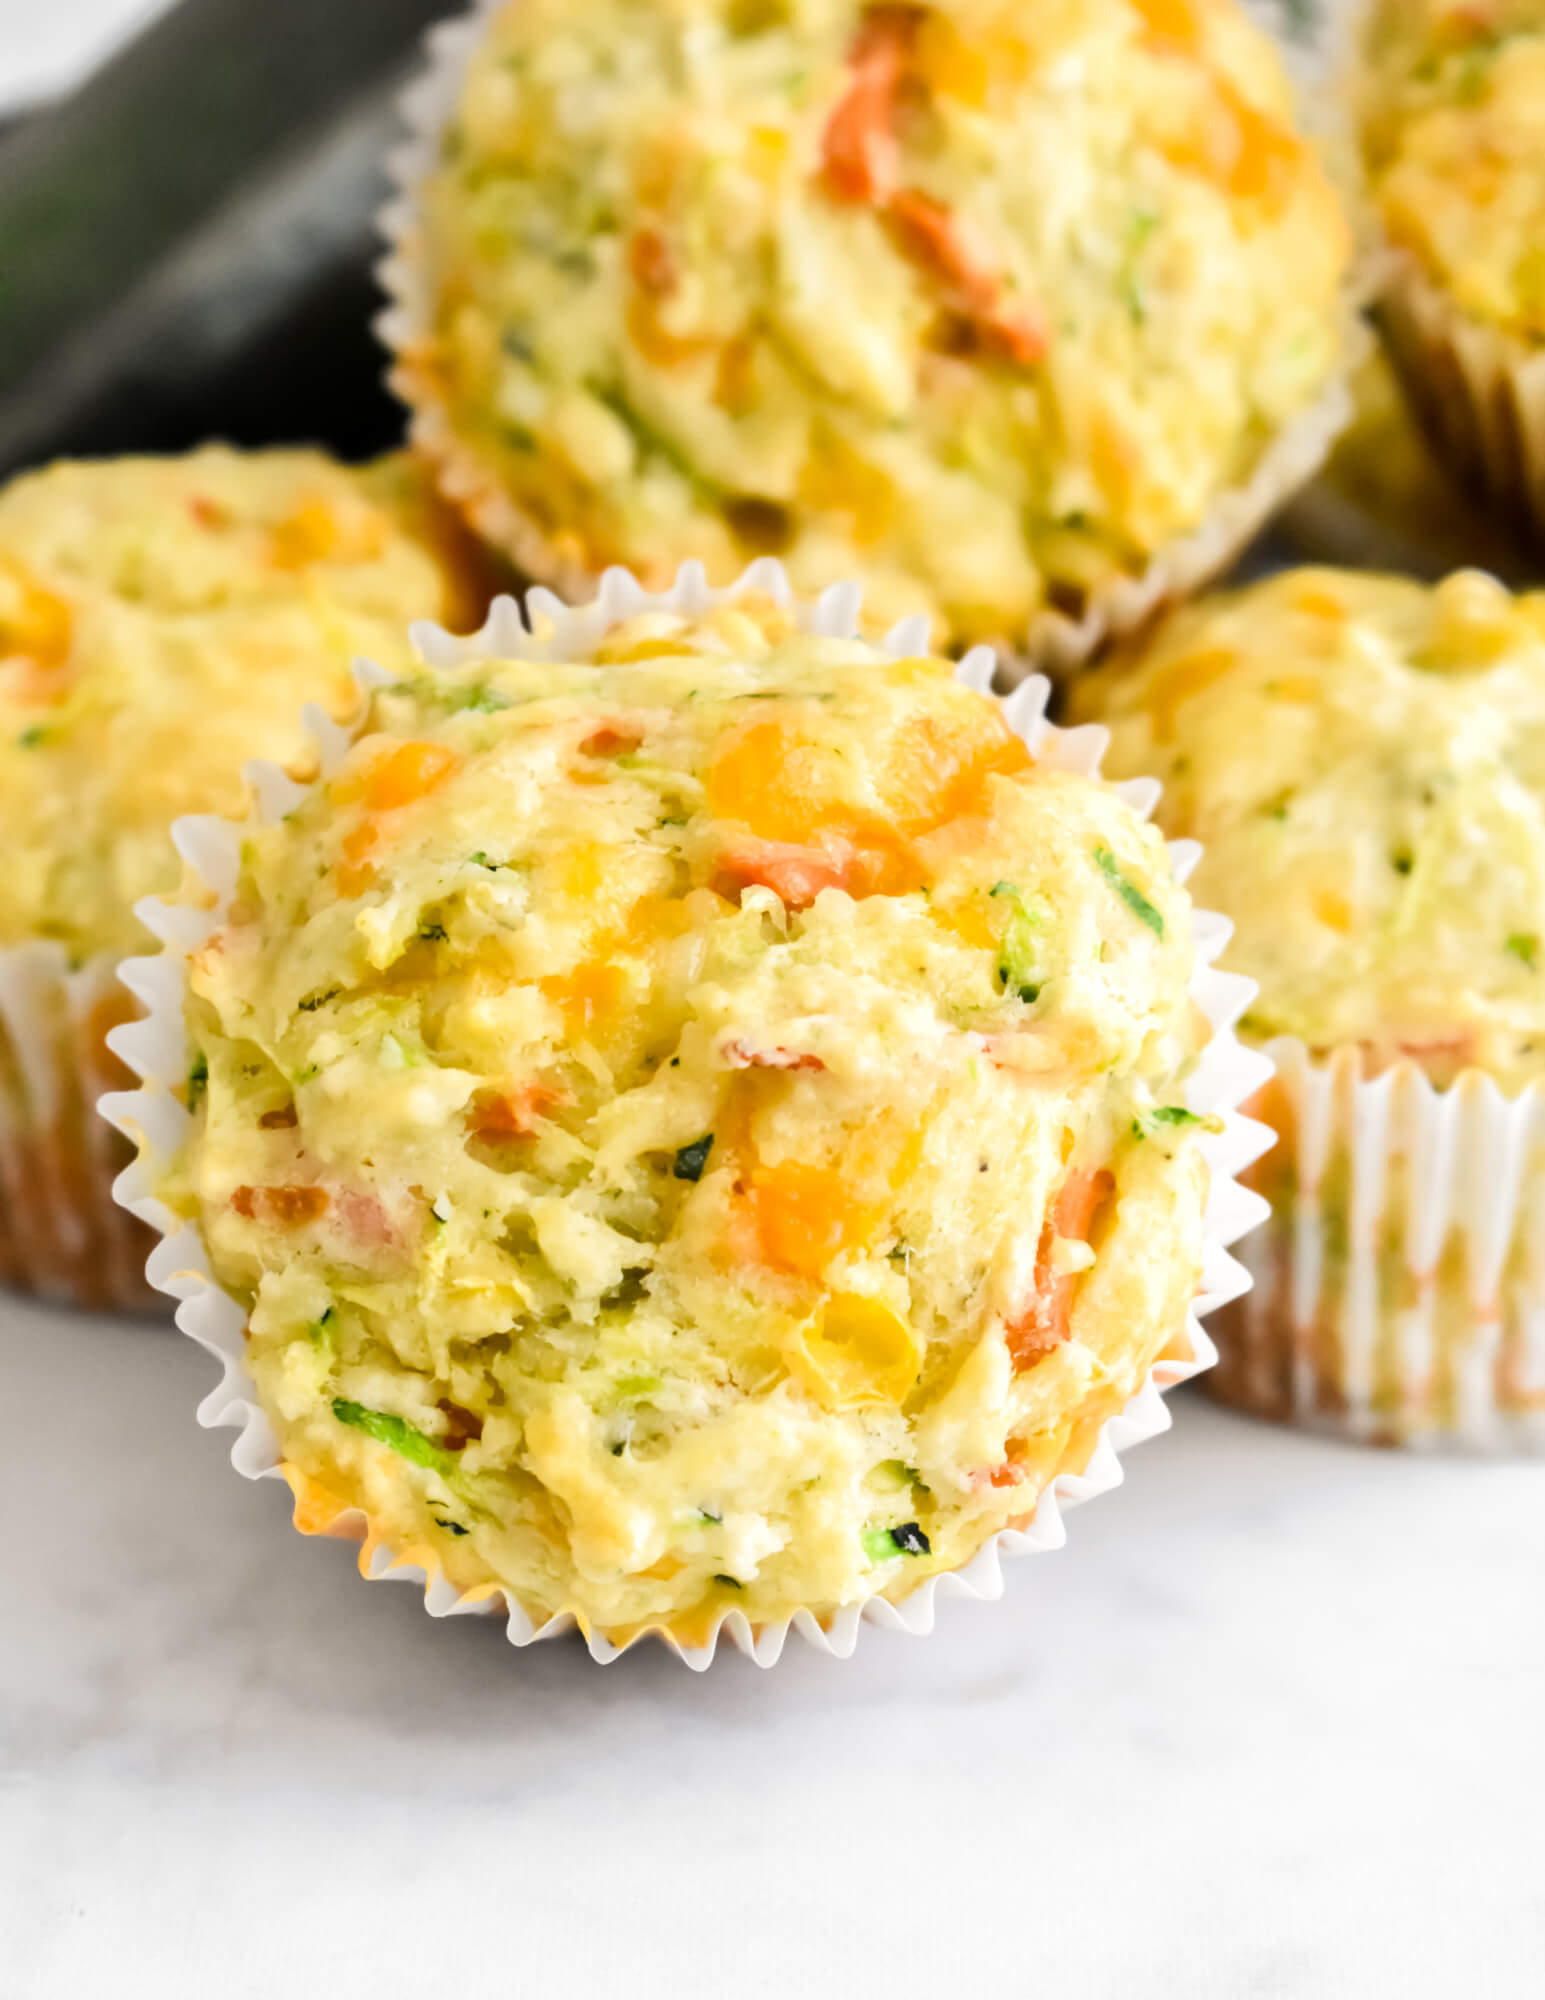 Closeup of a Savory Veggie Muffin showing the grated zucchini, carrots, and cheese.